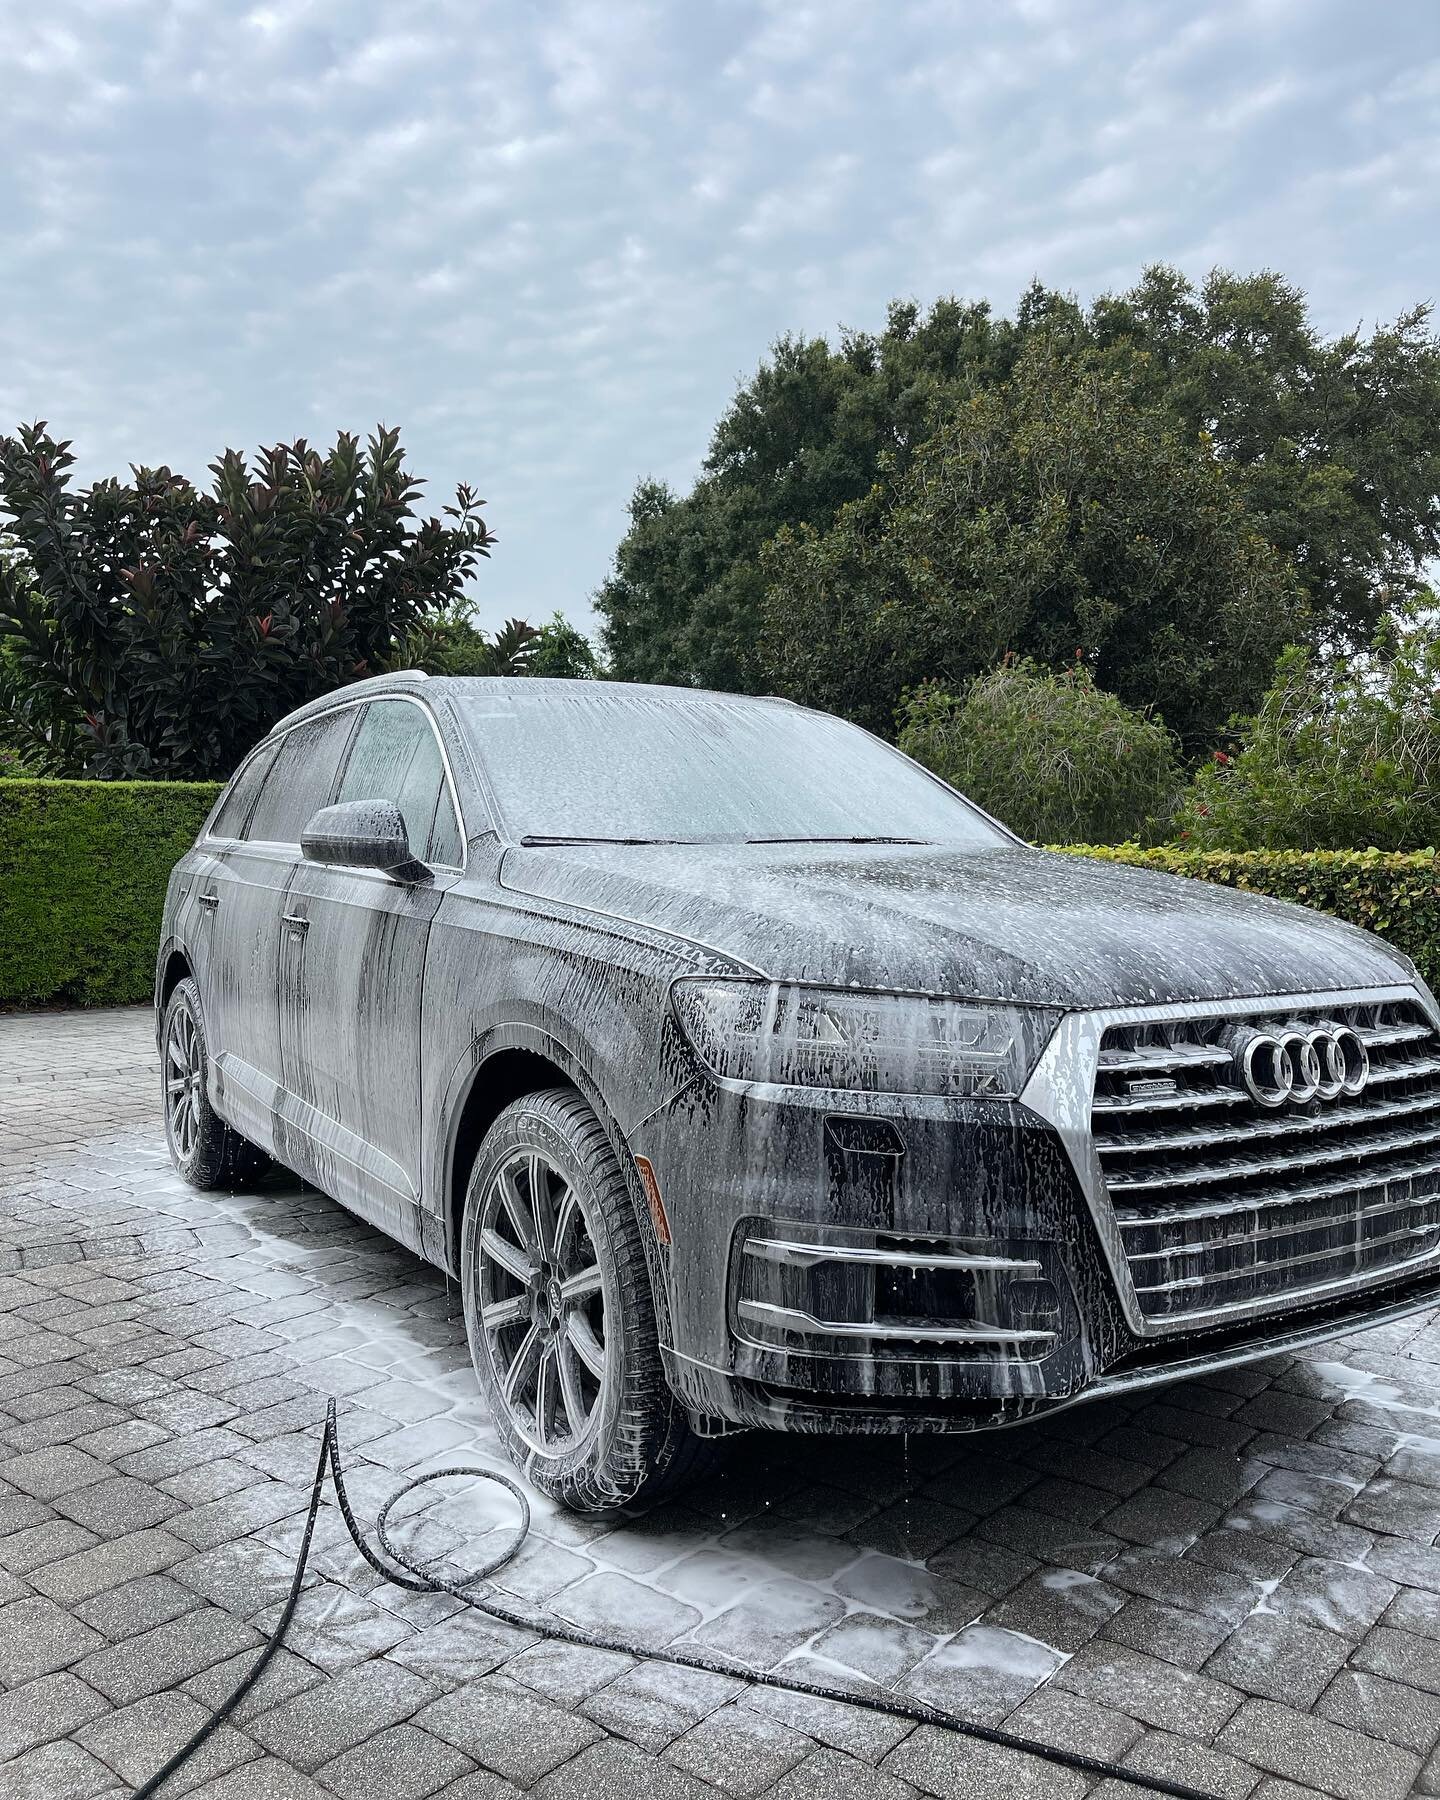 Biweekly maintenance on this beautiful Audi! Always making sure to keep this beauty in top notch 🙌🏼 if you&rsquo;re interested in getting your vehicle maintenance please shoot us a message or contact us at 407-285-6060
www.DiamondDetailOrlando.com